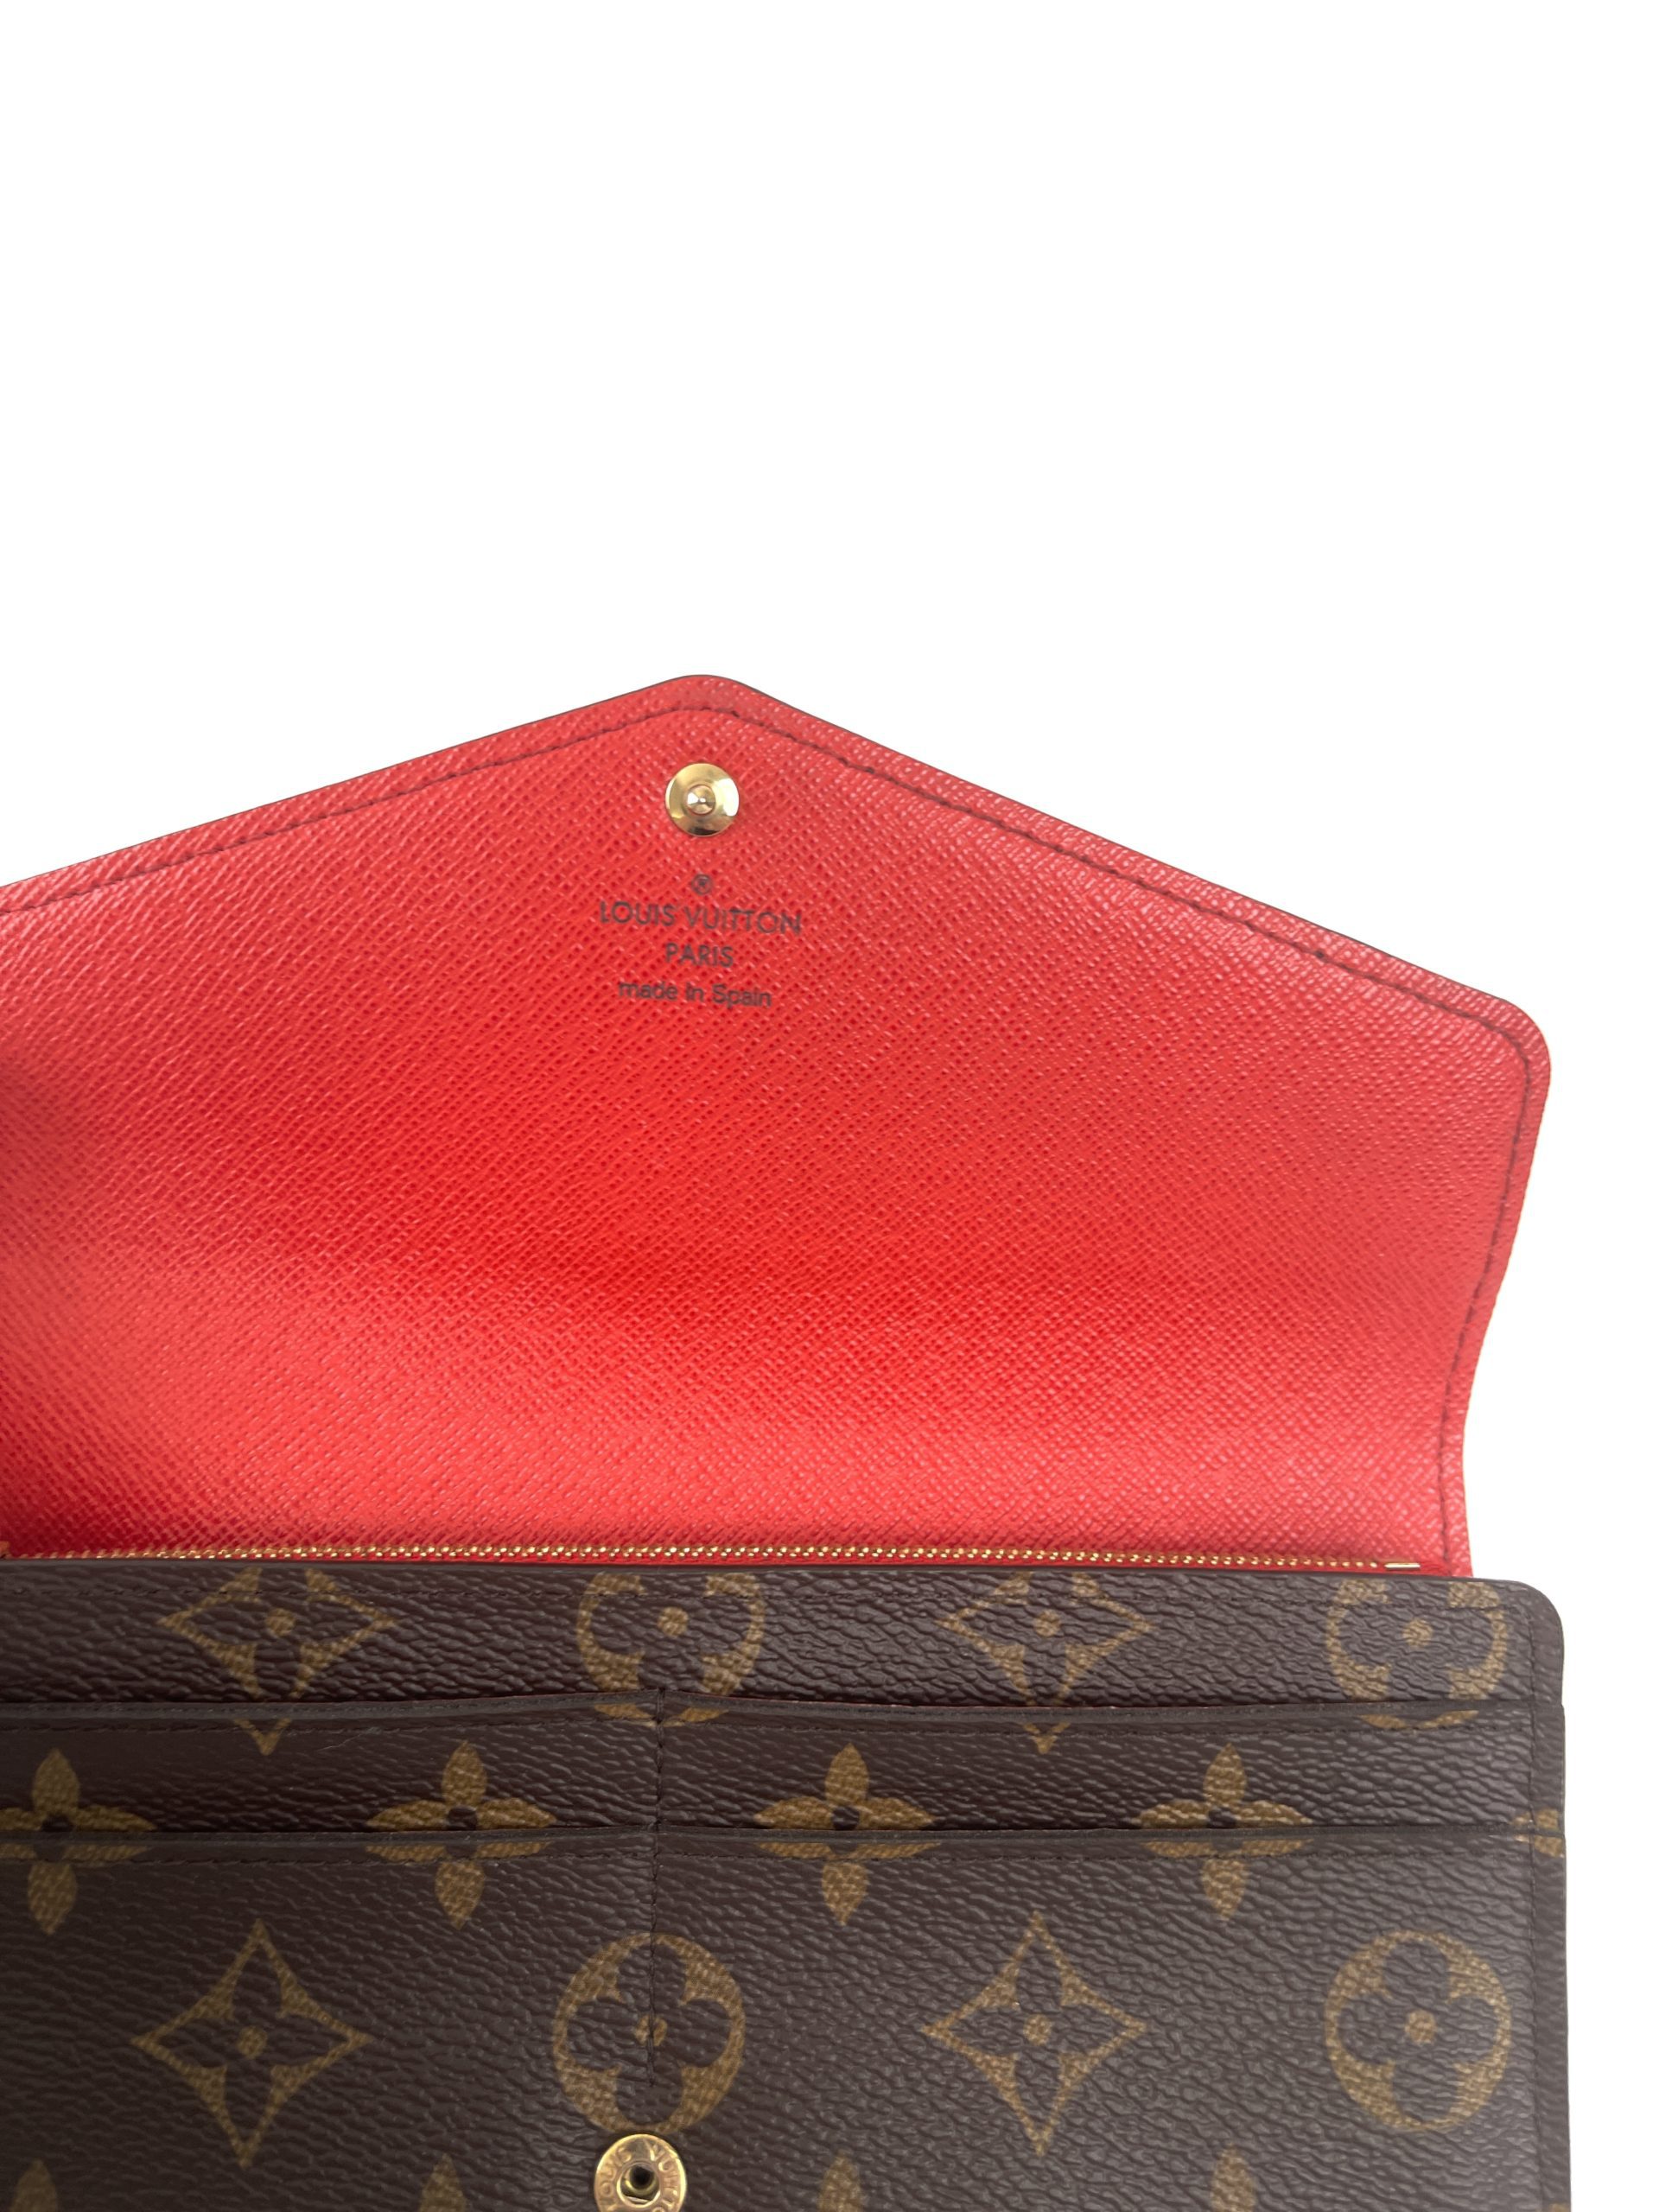 Louis Vuitton Monogram Sarah Wallet with Coquelicot Red - A World